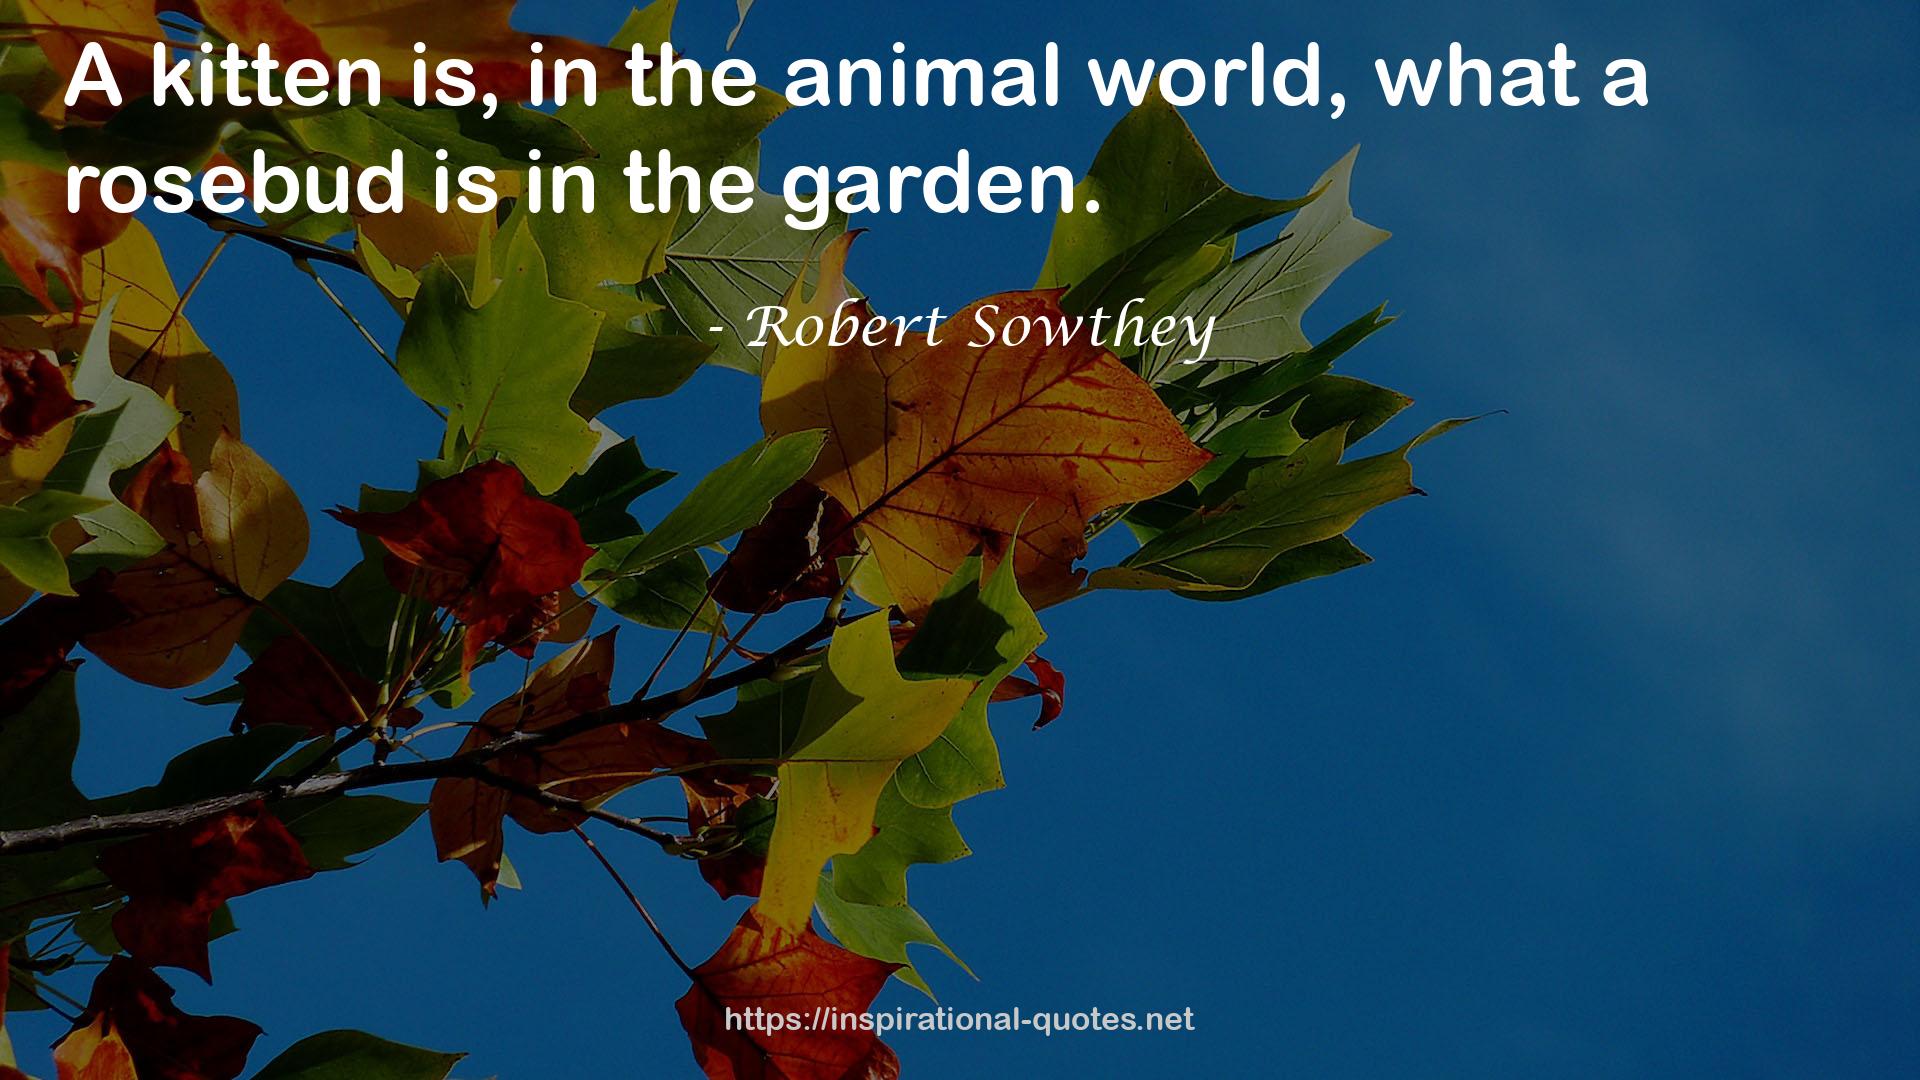 Robert Sowthey QUOTES